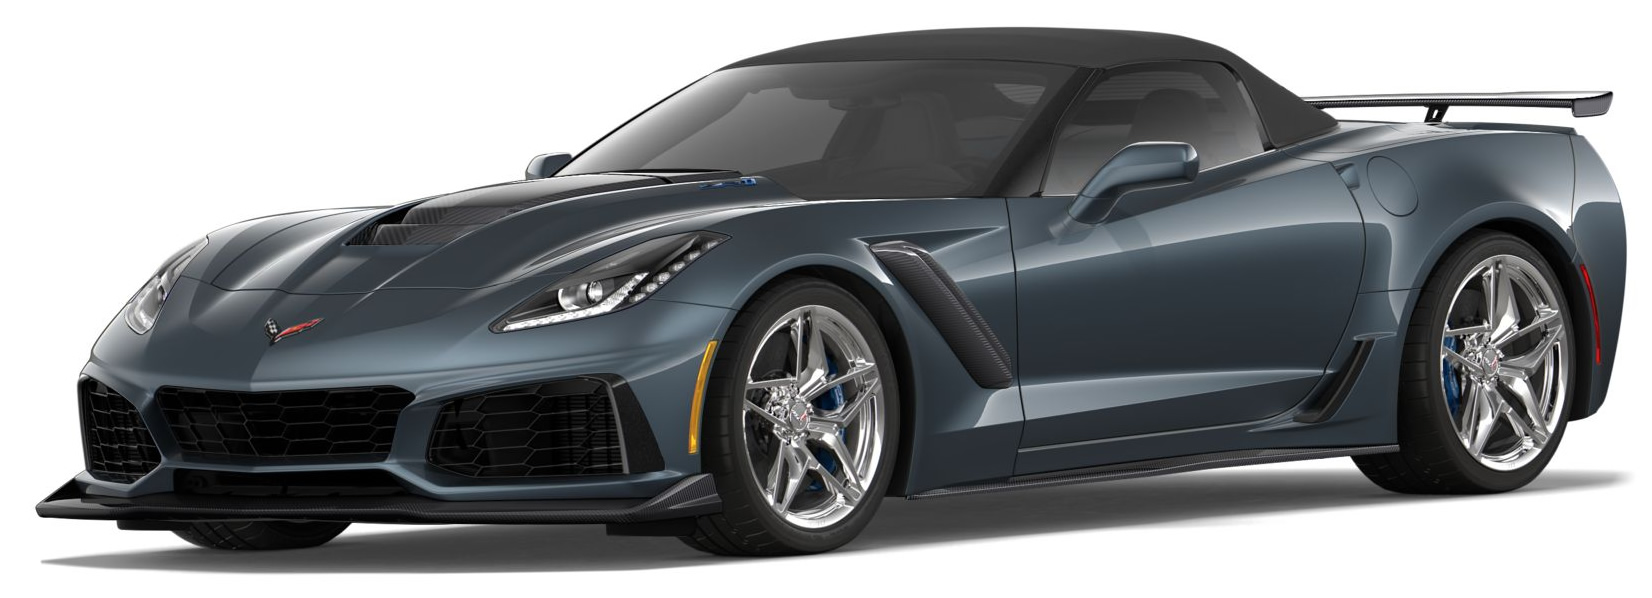 2019 Corvette ZR1 Convertible in Shadow Gray Metallic with Gray Top and Chrome Wheels